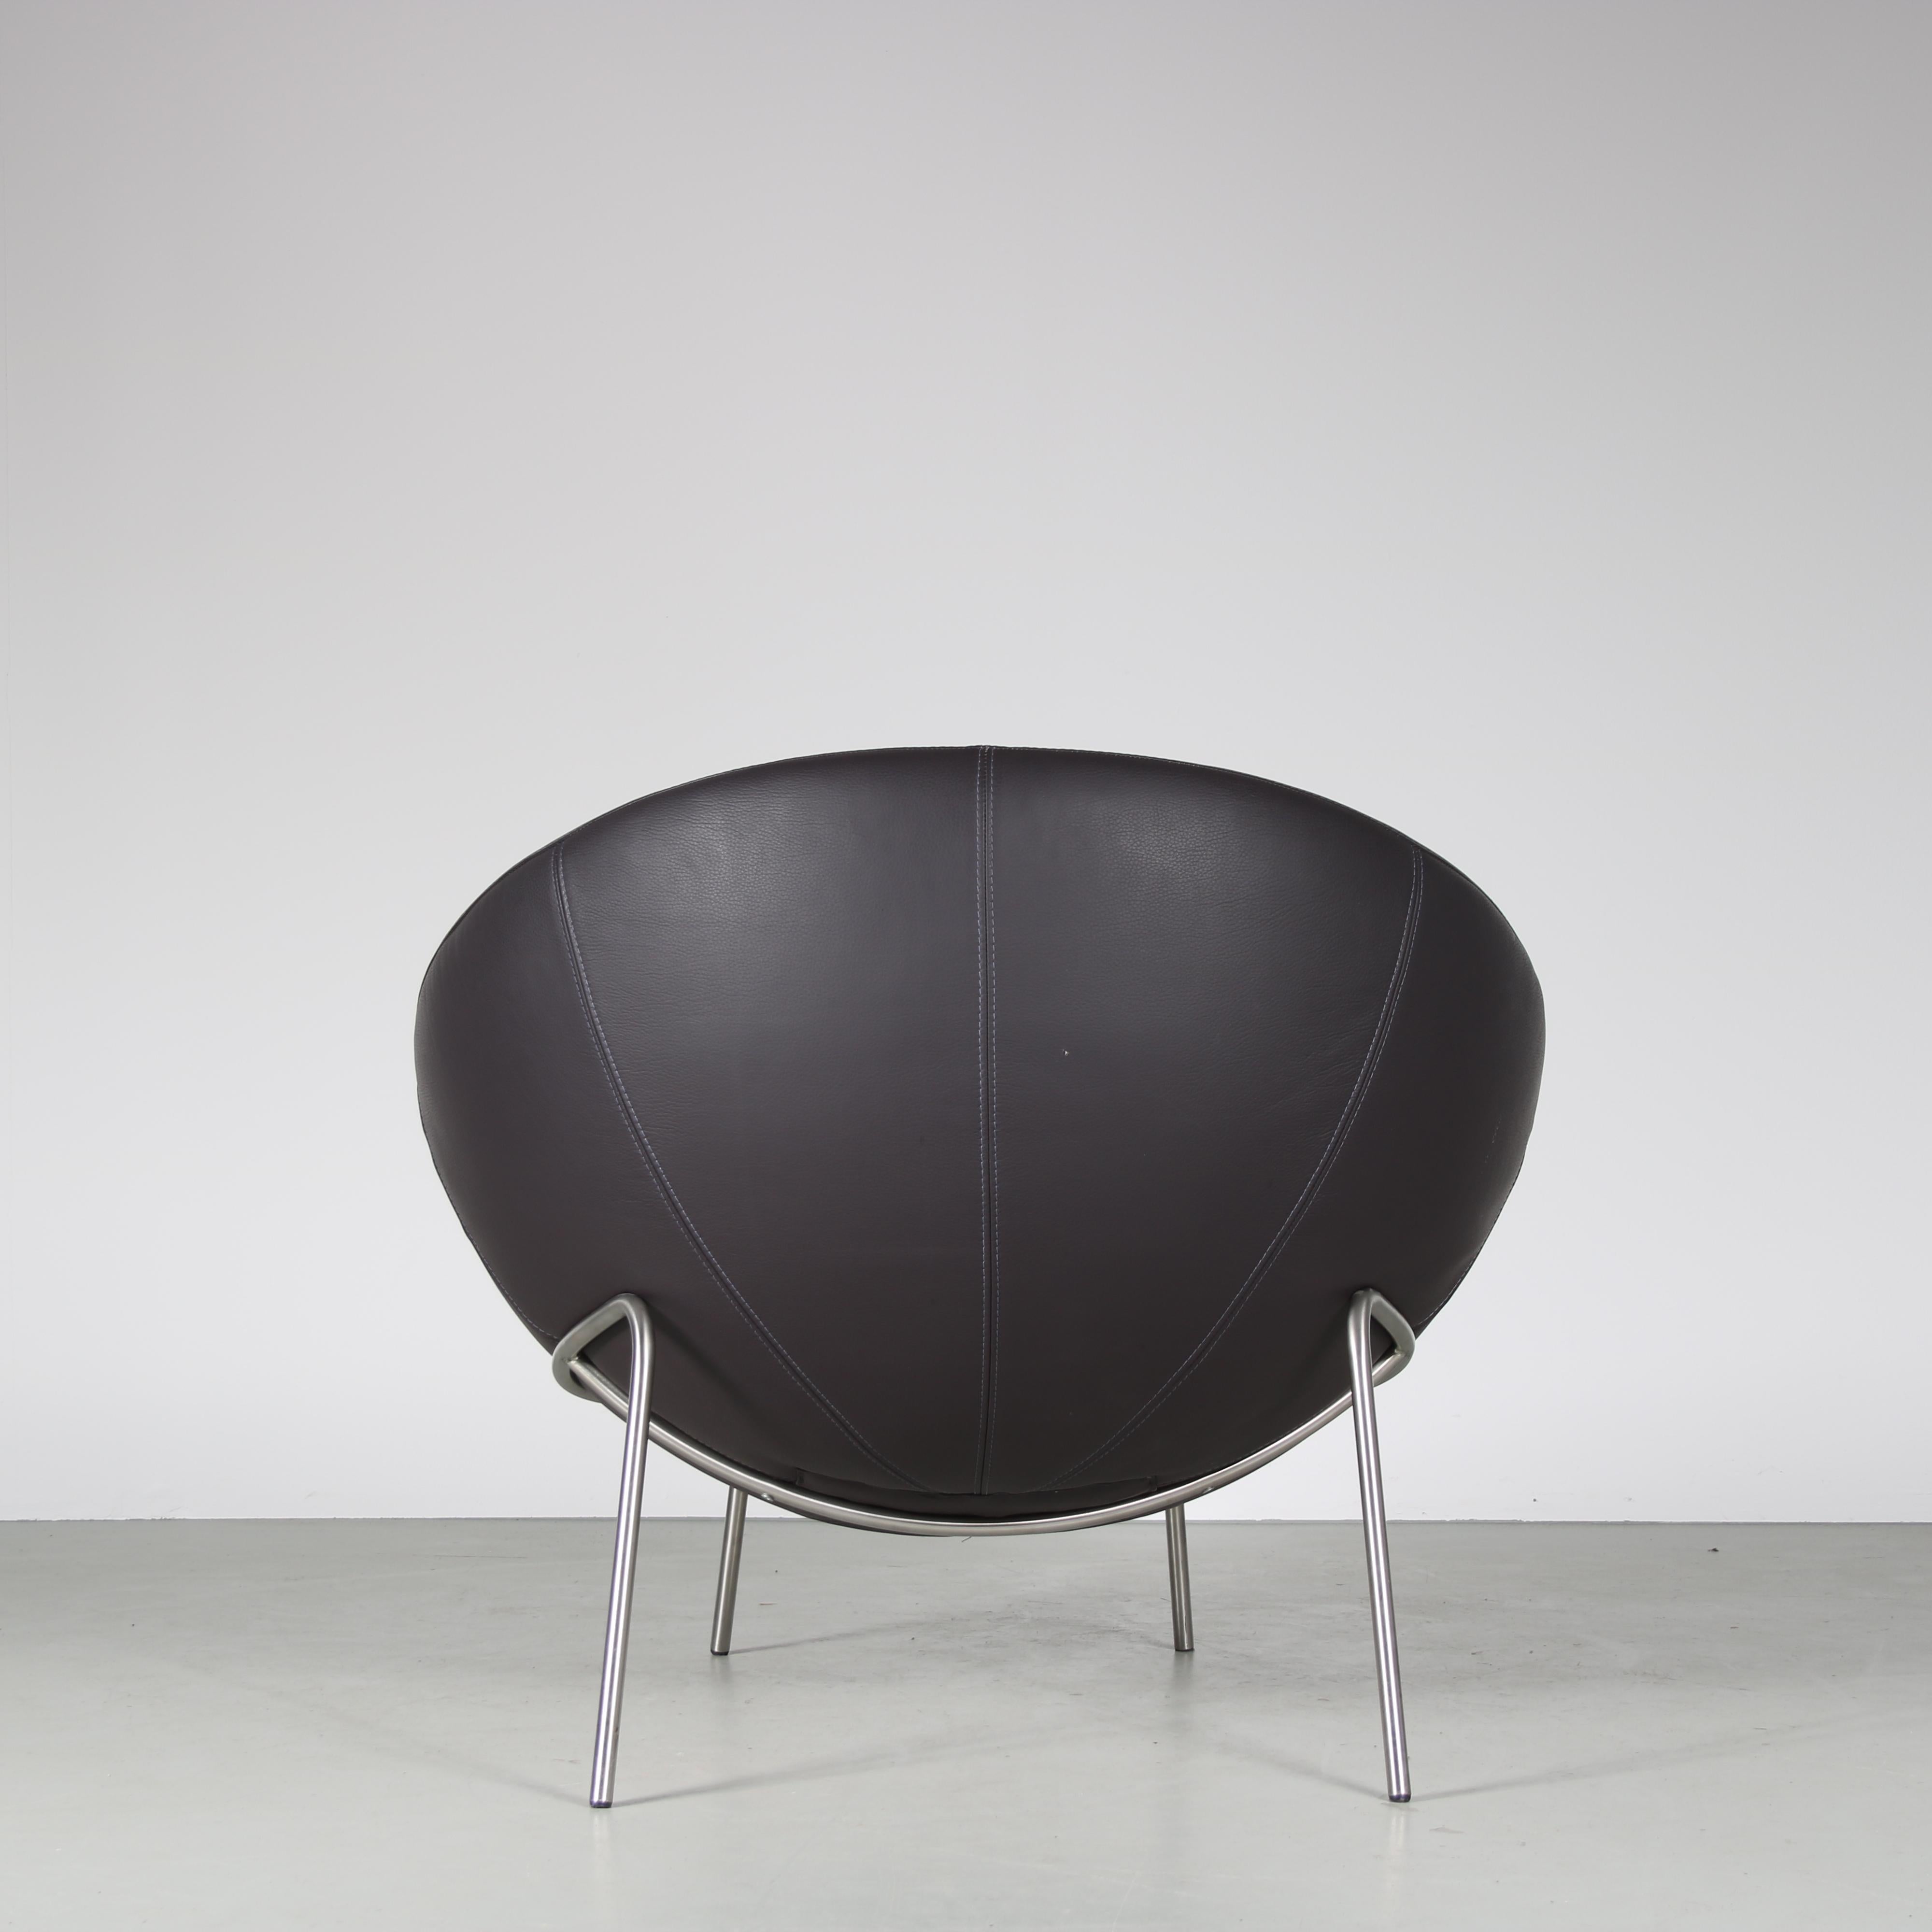 Metal Lounge Chair by Bert Plantagie from the Netherlands, 2000s